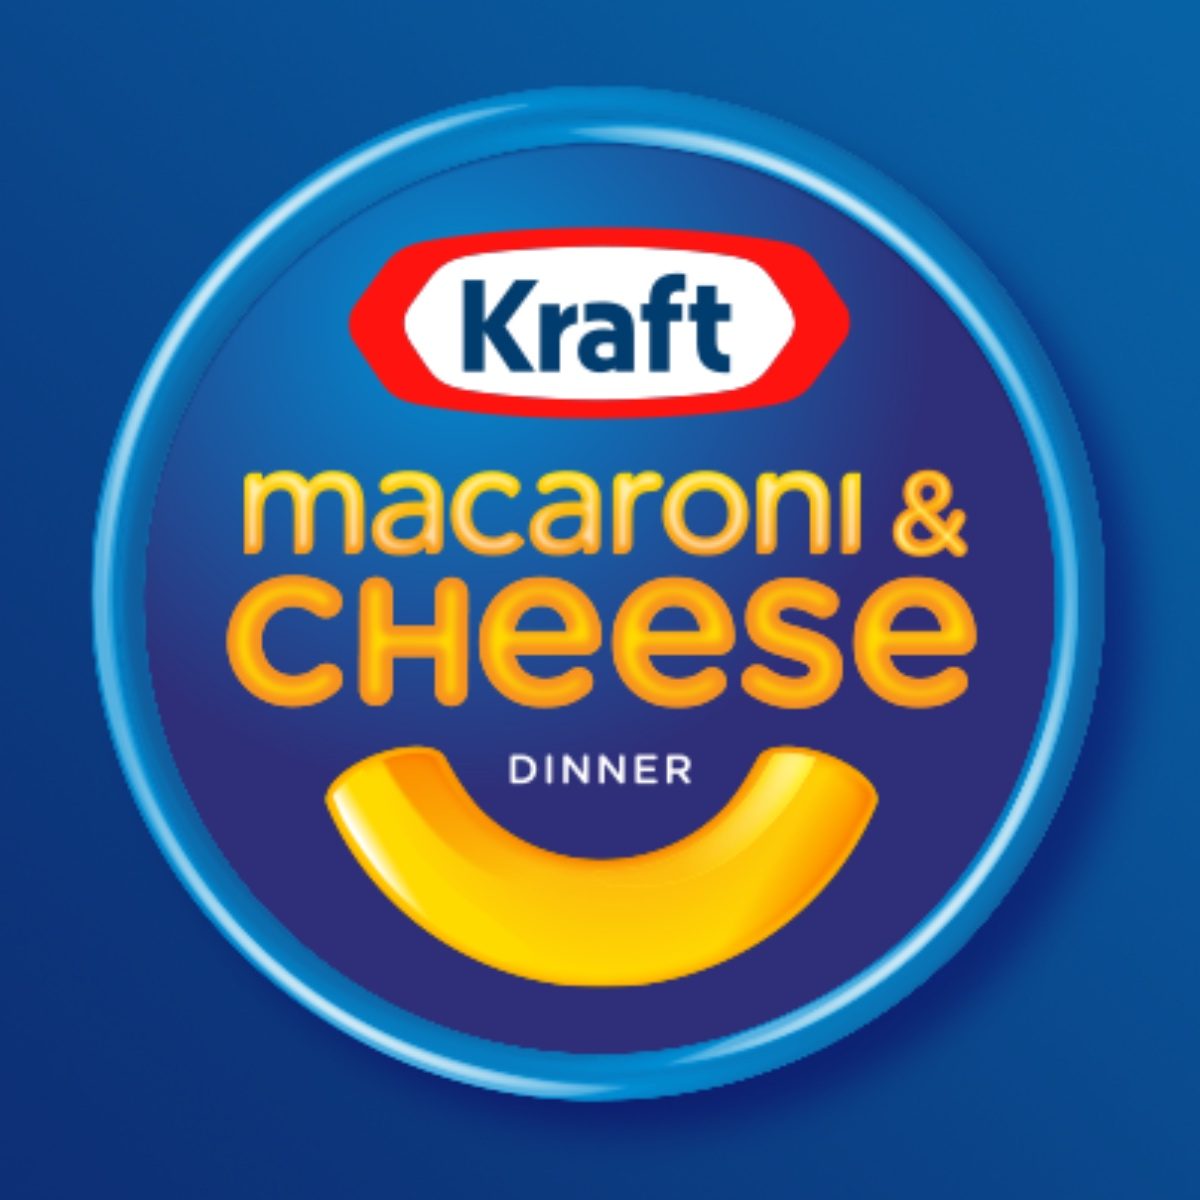 <p><strong><a class="SWhtmlLink" href="http://www.kraftmacandcheese.com" rel="noopener">Kraft Mac and Cheese</a>, St. Louis</strong></p> <p>This iconic blue box was invented during World War II. It was a time when meat and dairy were highly rationed, and families needed something hearty and filling. Kraft Mac and Cheese cost only 19 cents and had a shelf life of 10 months!</p>